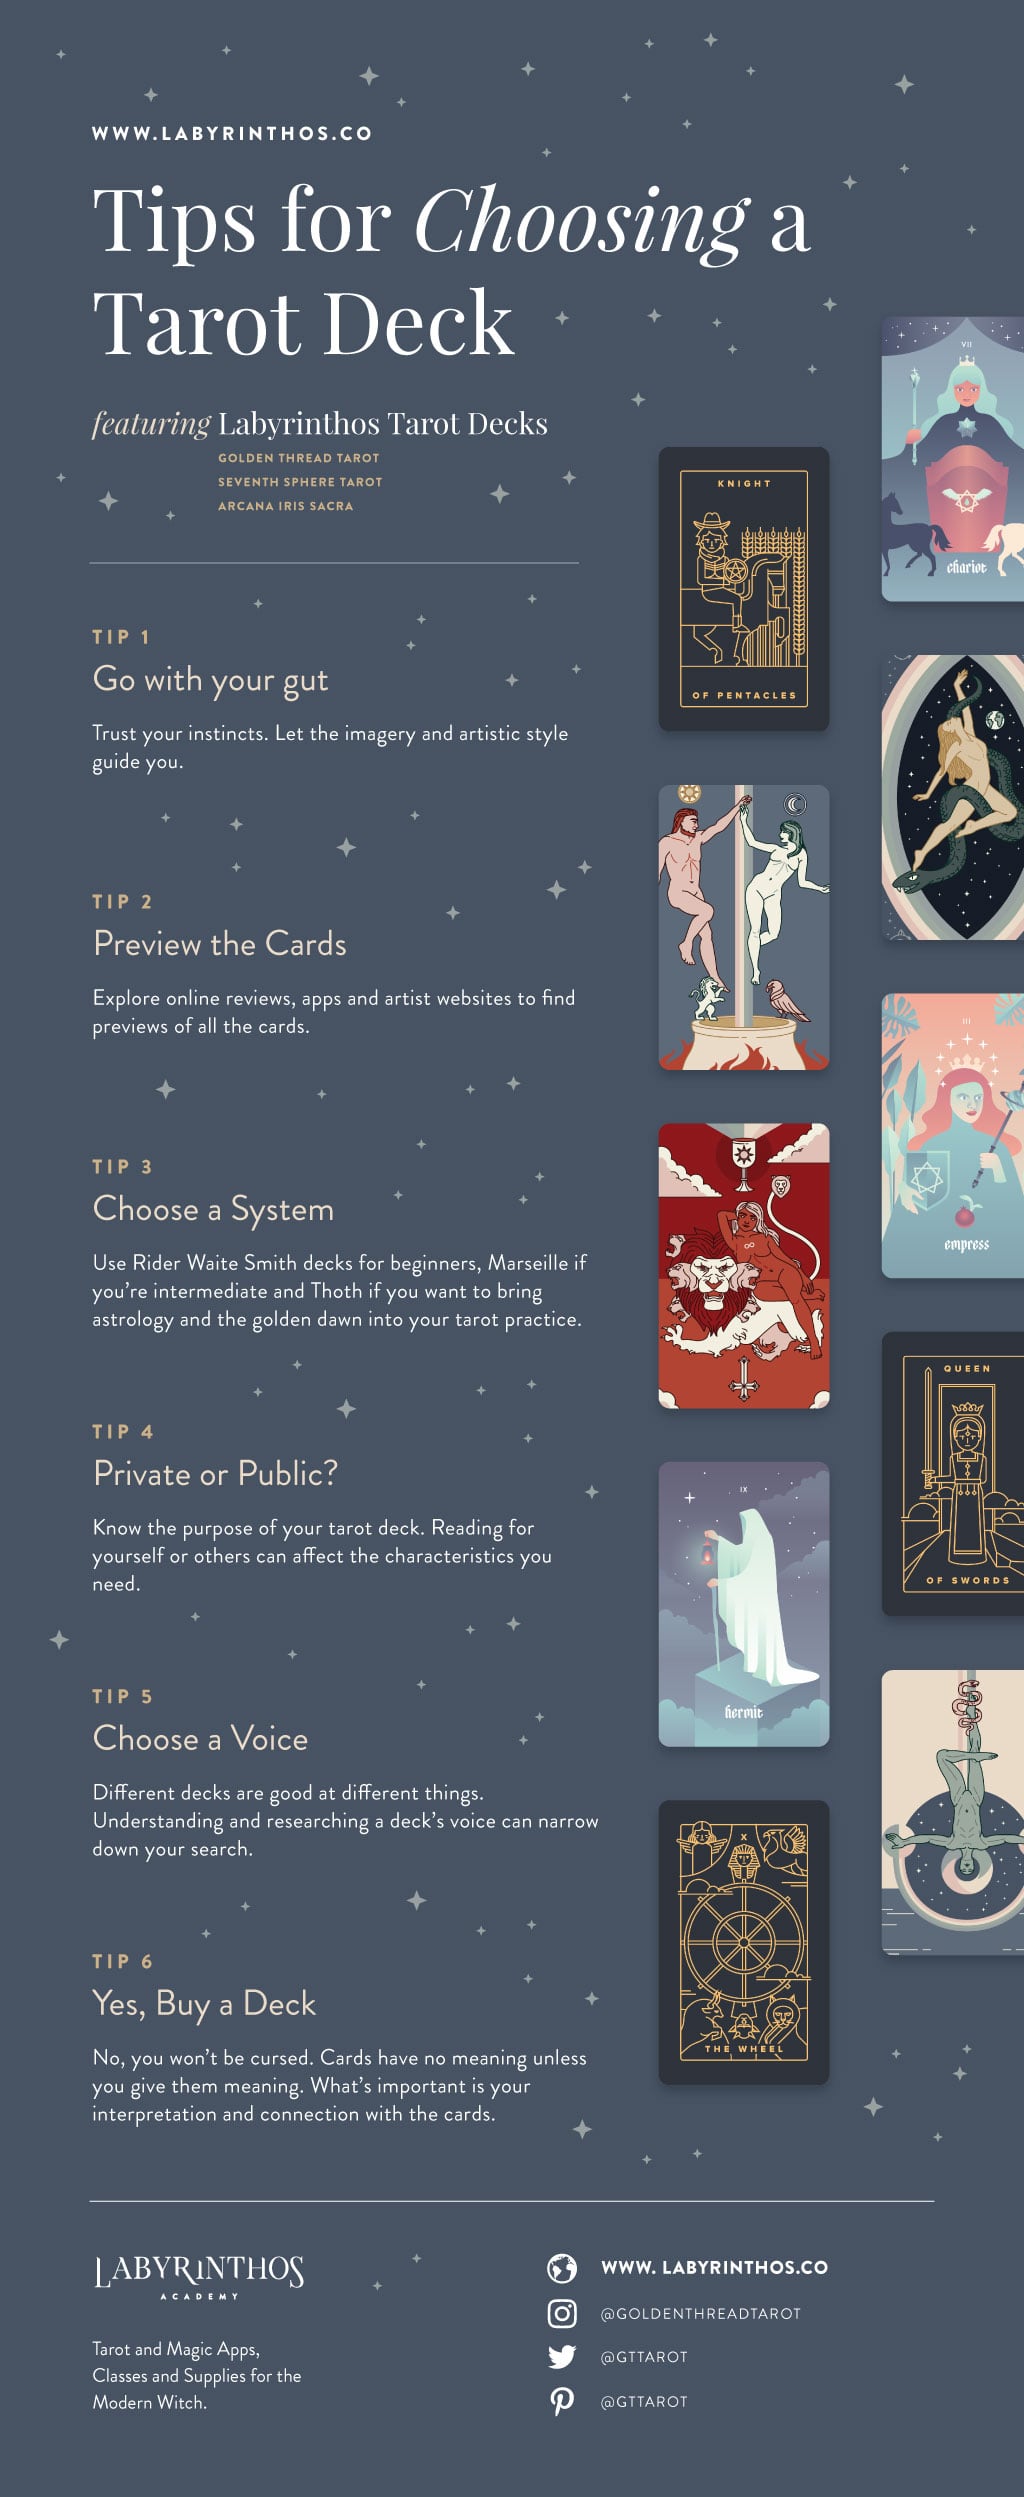 How to Choose the right tarot deck for you - an infographic